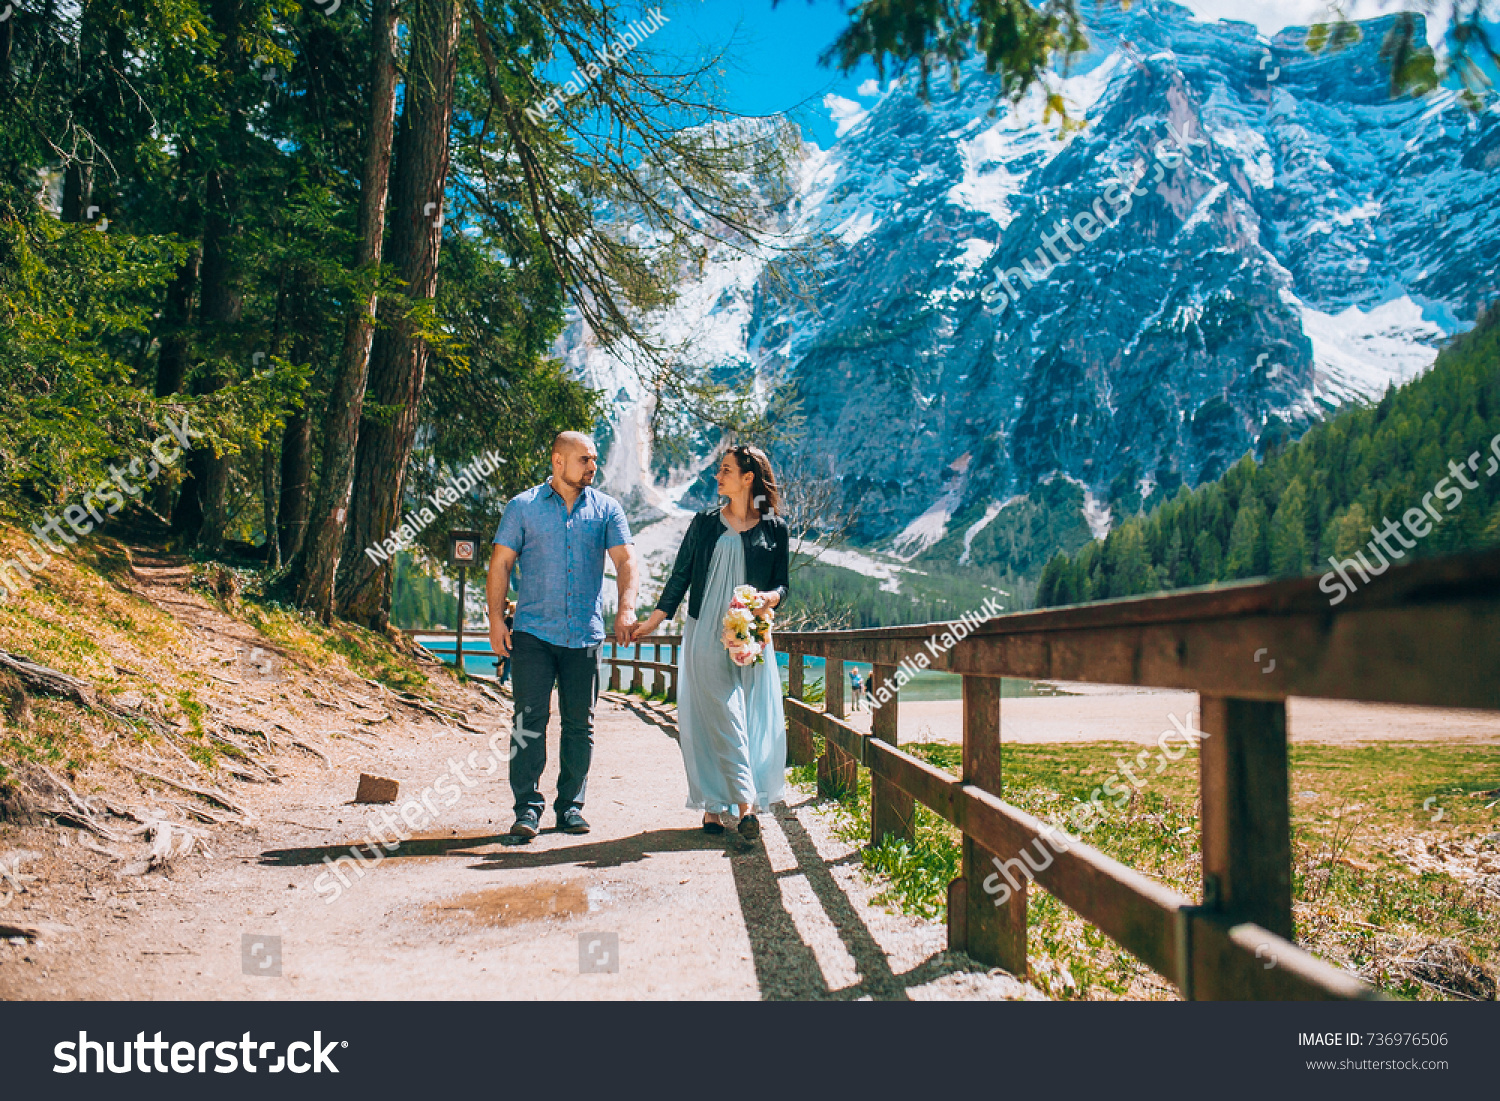 Young Couple against lake, summer park. lago di braies,Dolomite,Italy. Man and woman on vacation in beautiful place. #736976506